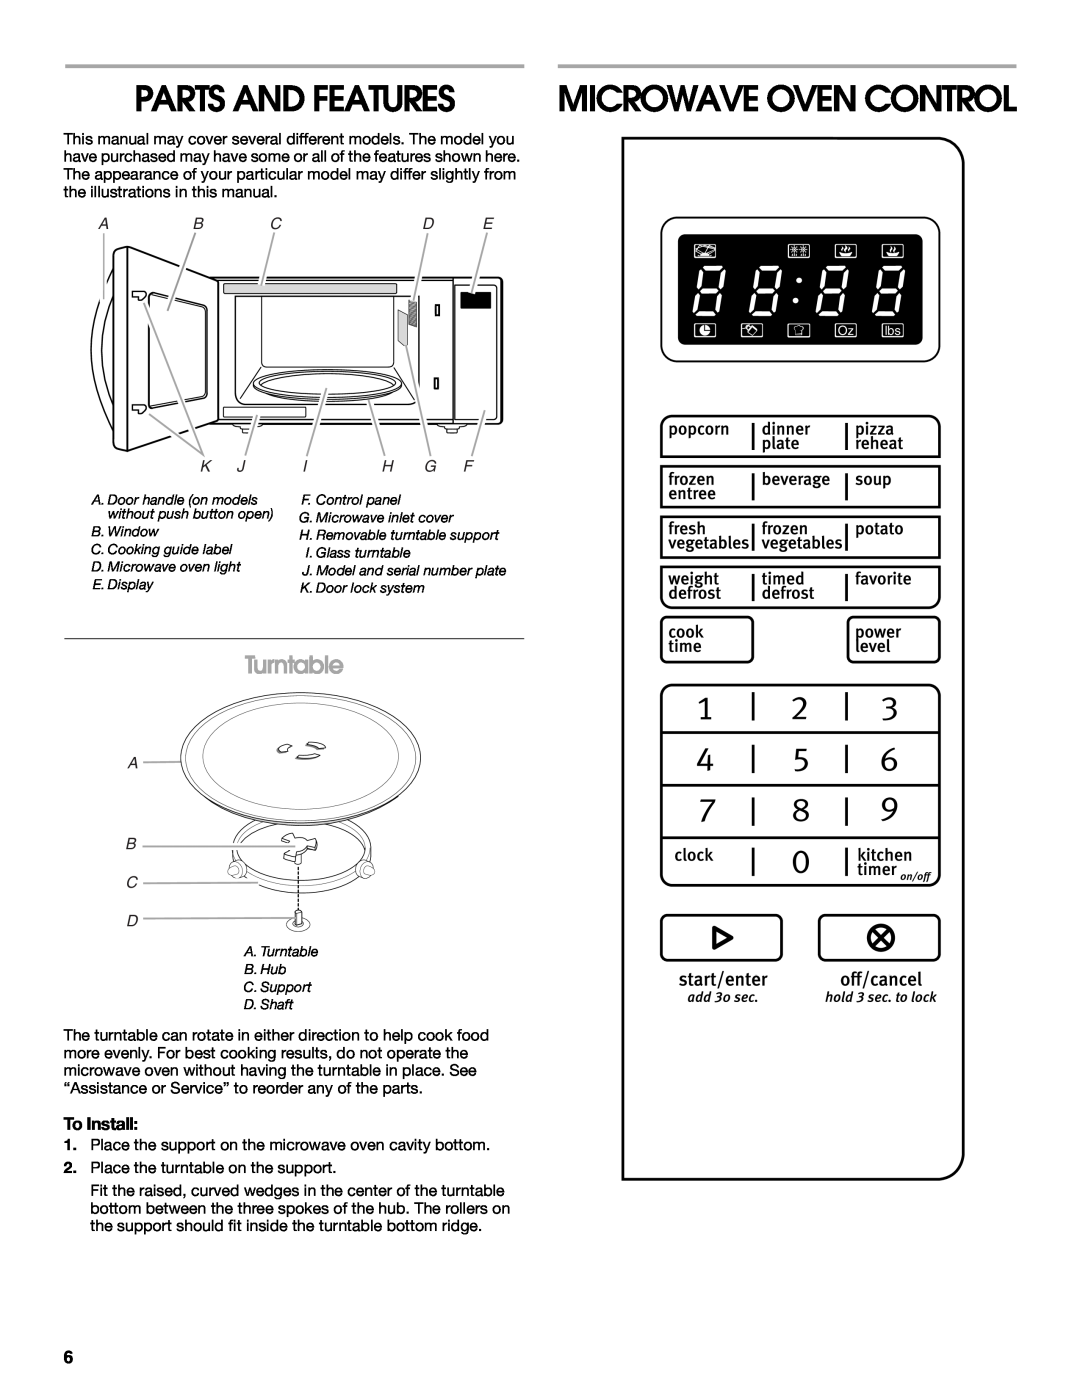 Whirlpool UMC5165 manual Parts And Features, Turntable, Microwave Oven Control, Ab Cd E, I H G F, A B C D 